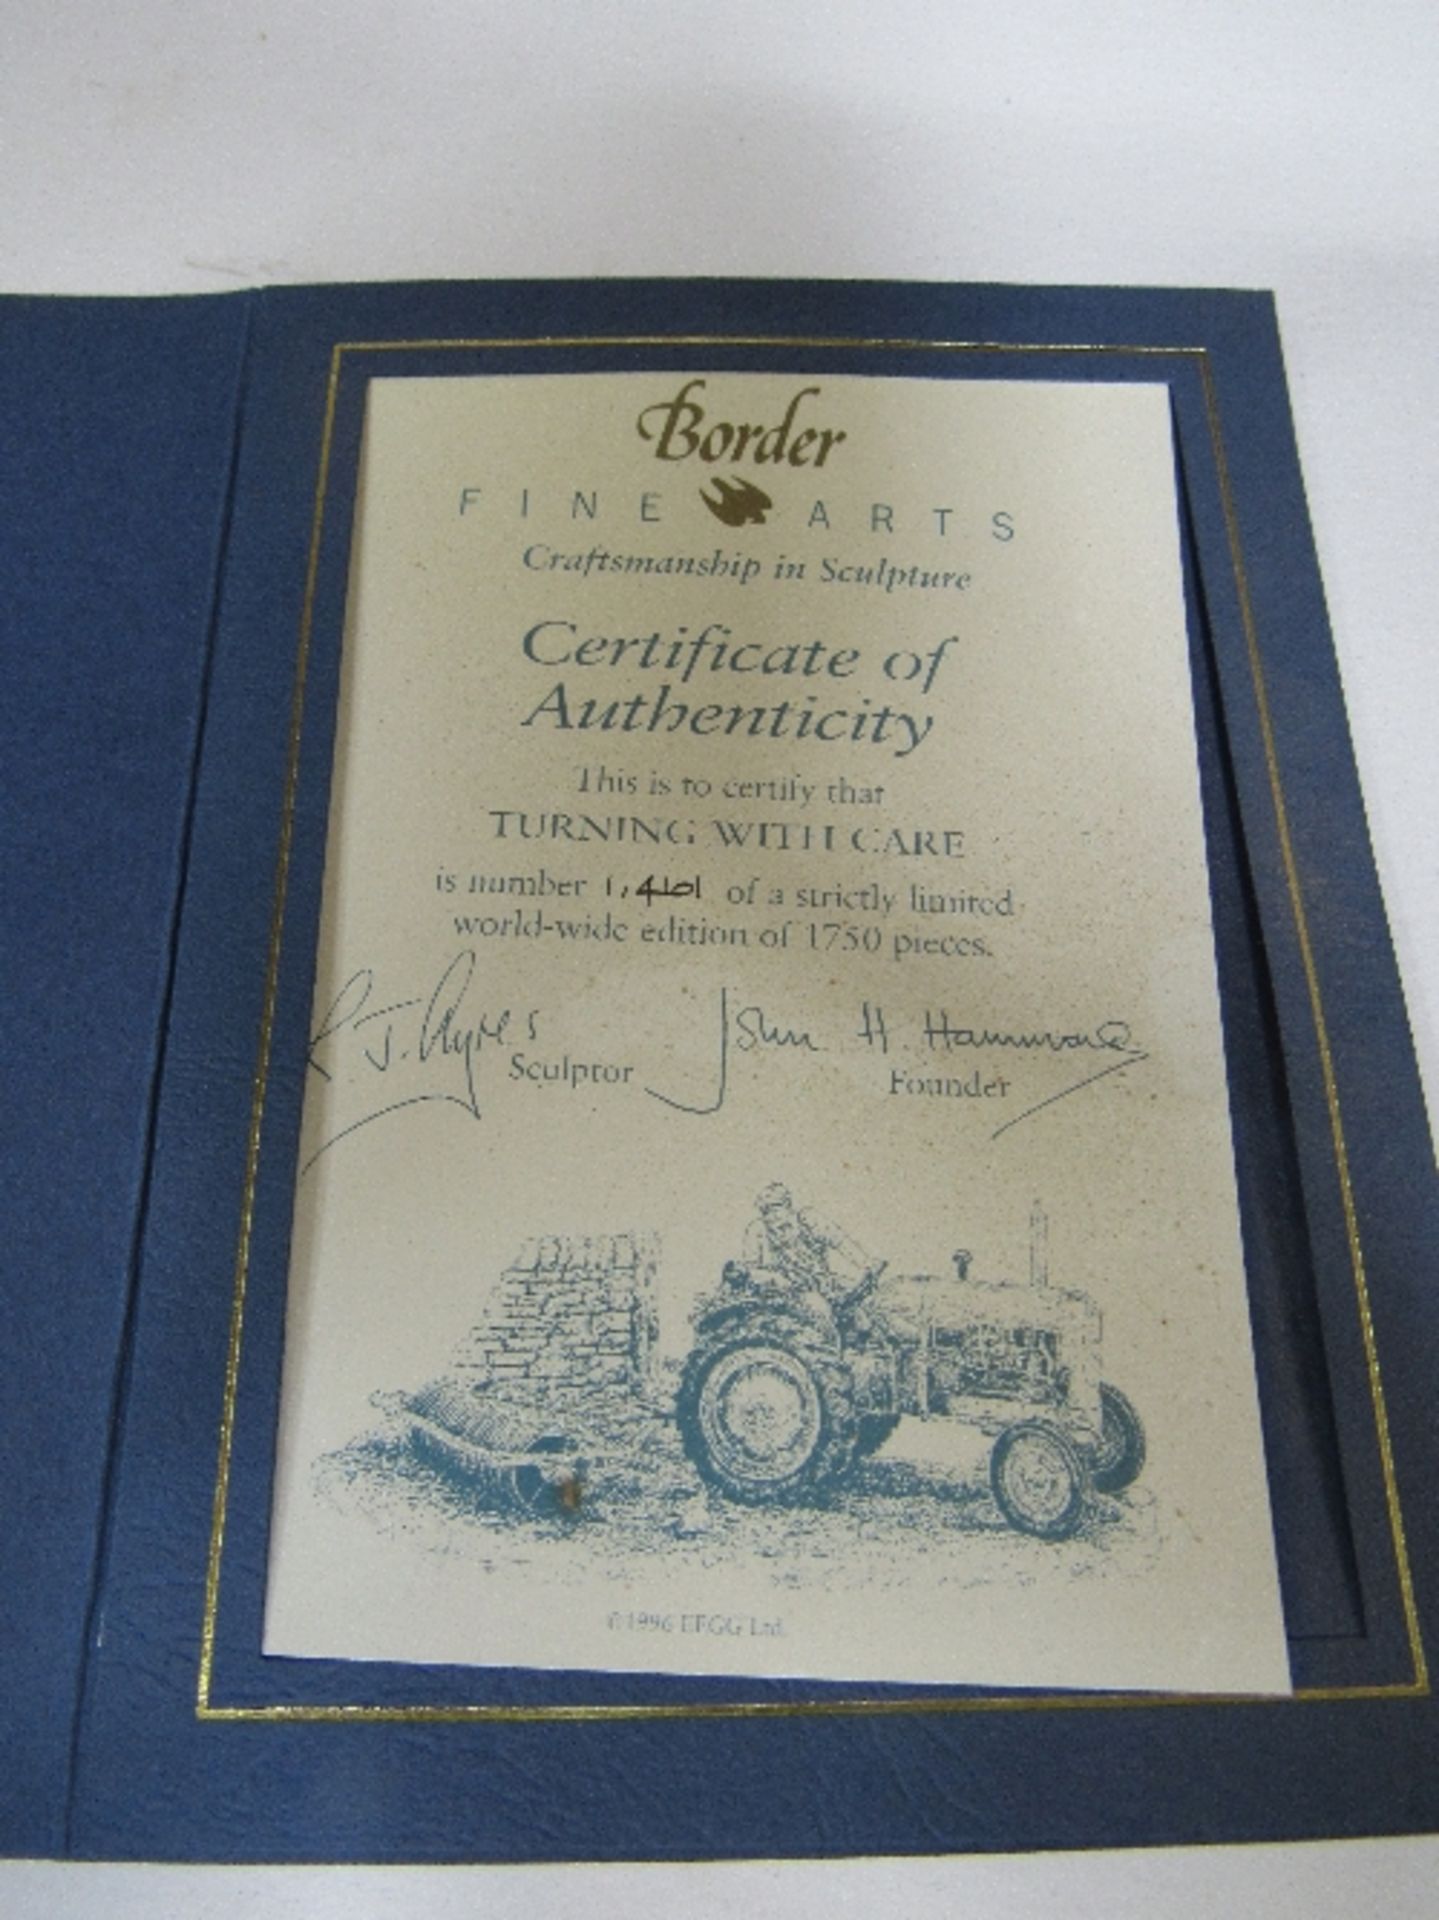 Border Fine Arts 'Turning with Care' Nuffield Tractor limited edition 1277 of 1750 Model B0094 - Image 4 of 5